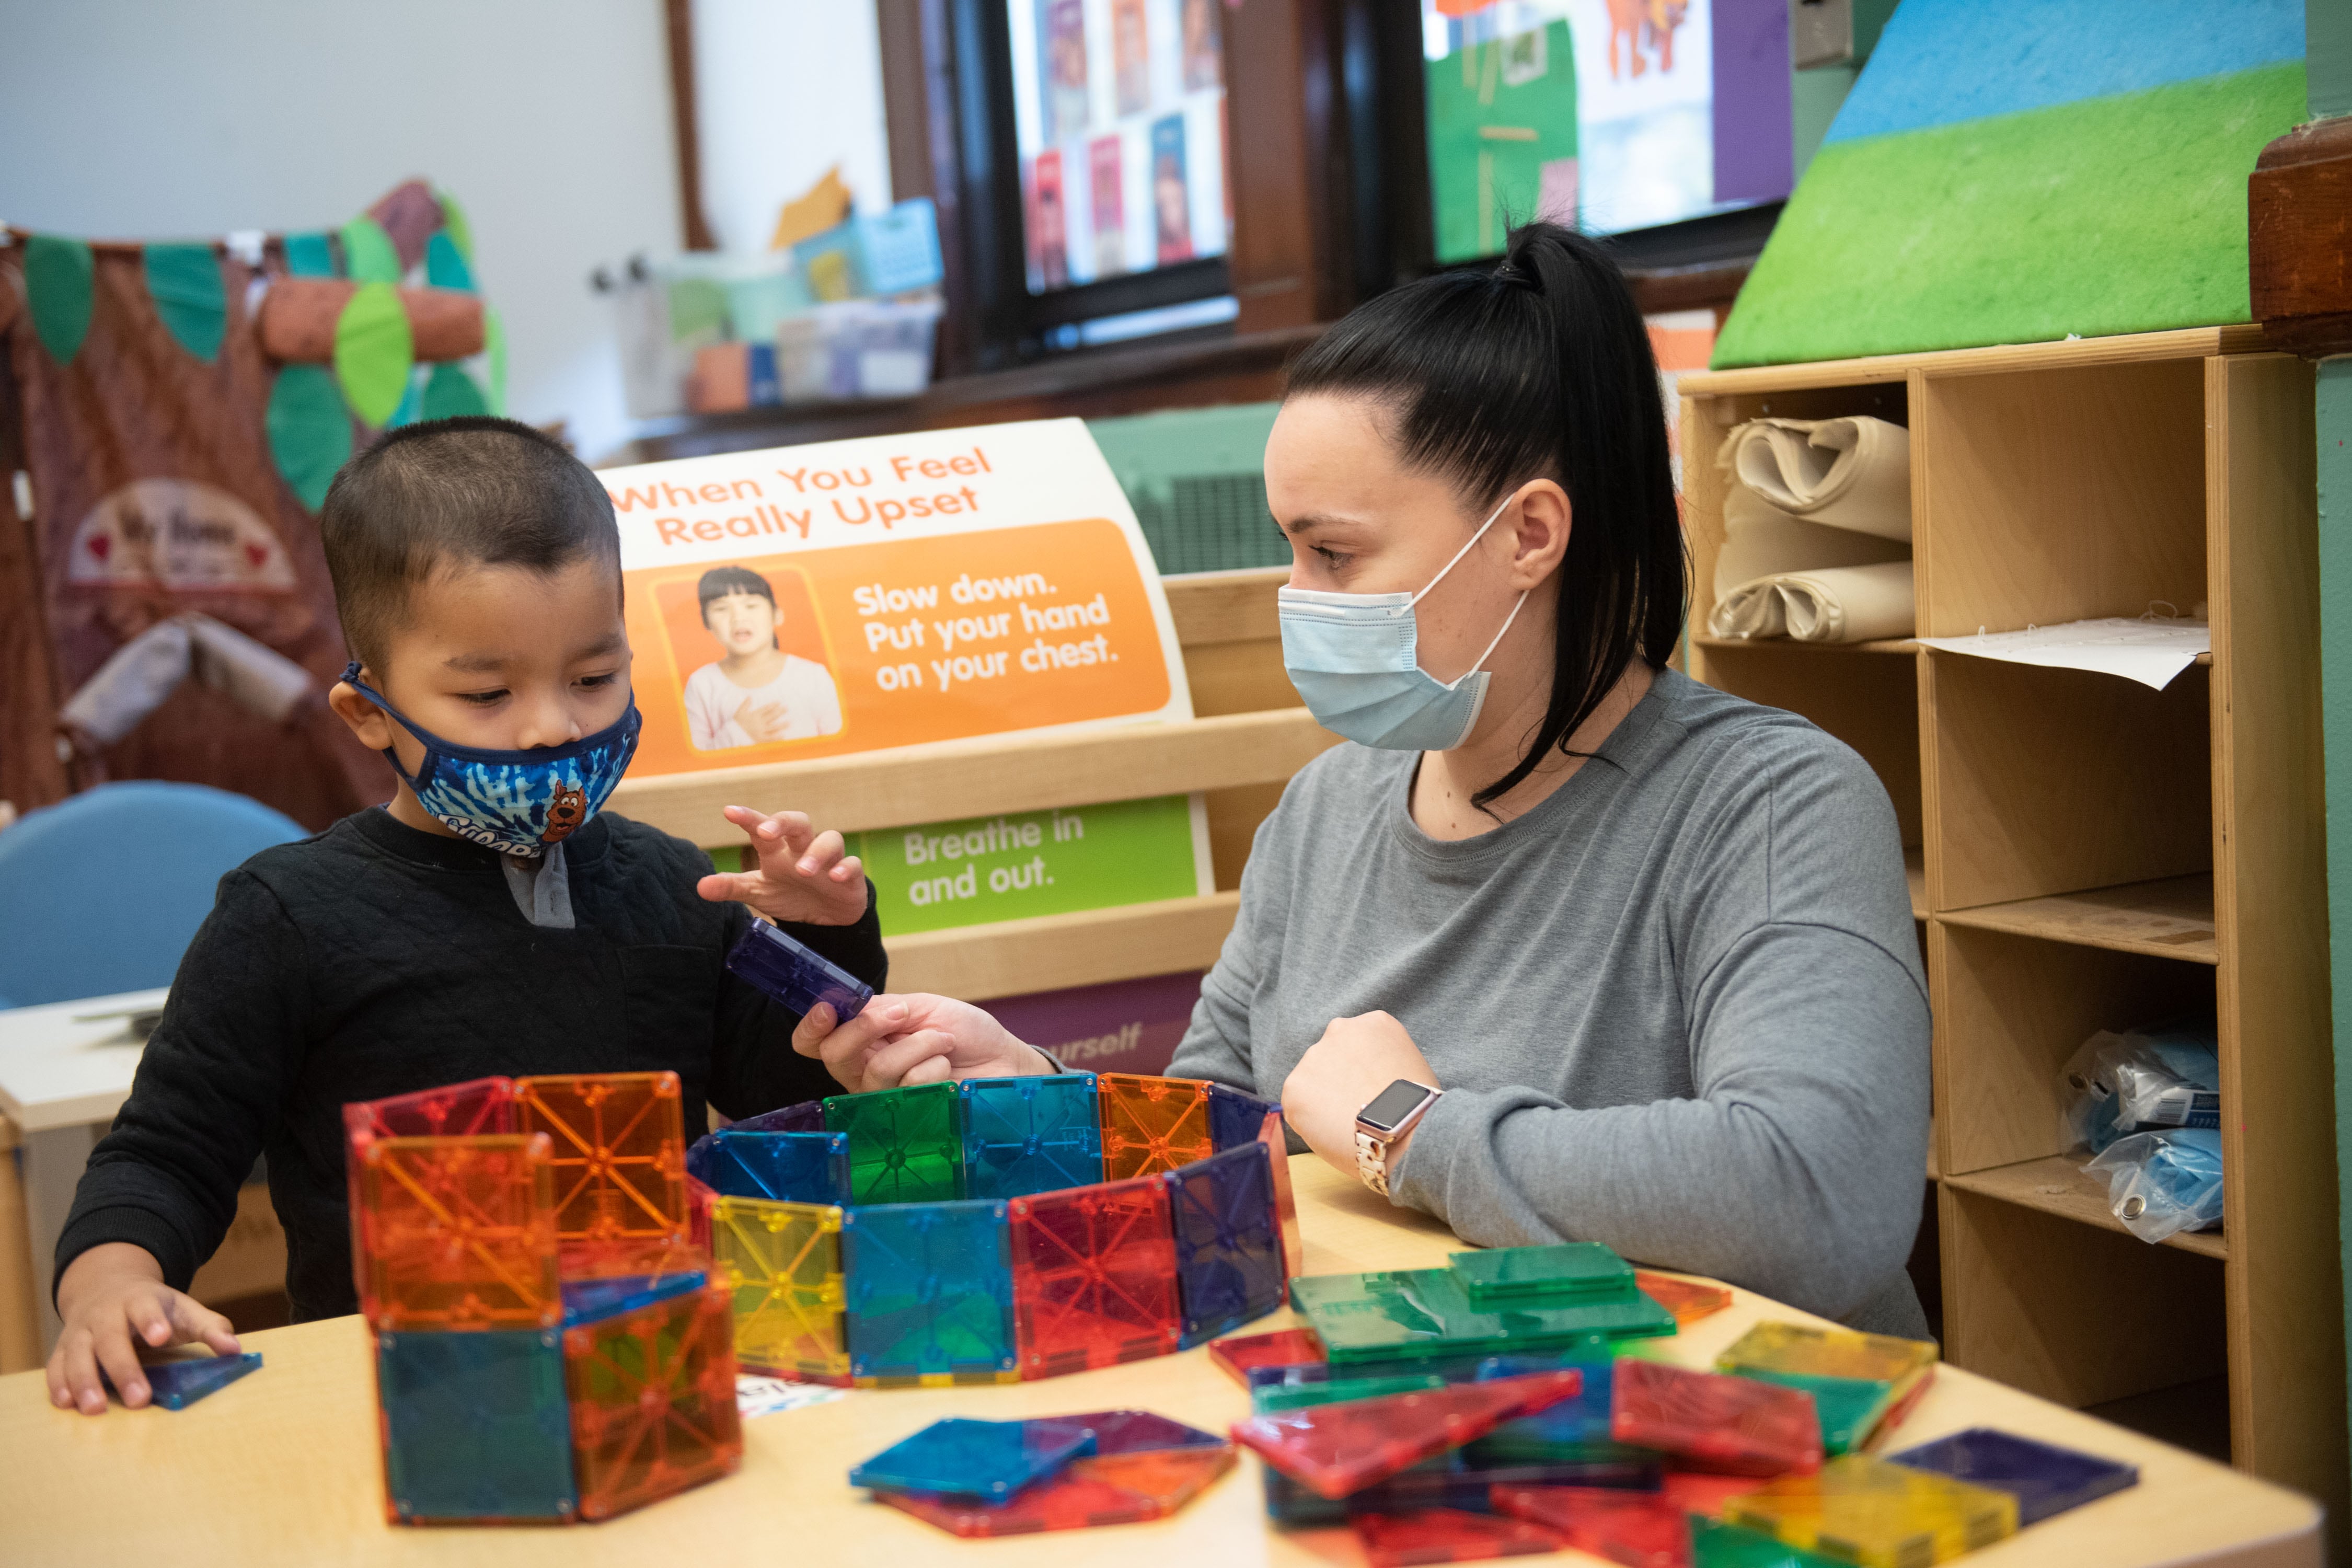 A preschool staff member works with a young boy with blocks in the classroom. They are both wearing protective masks.